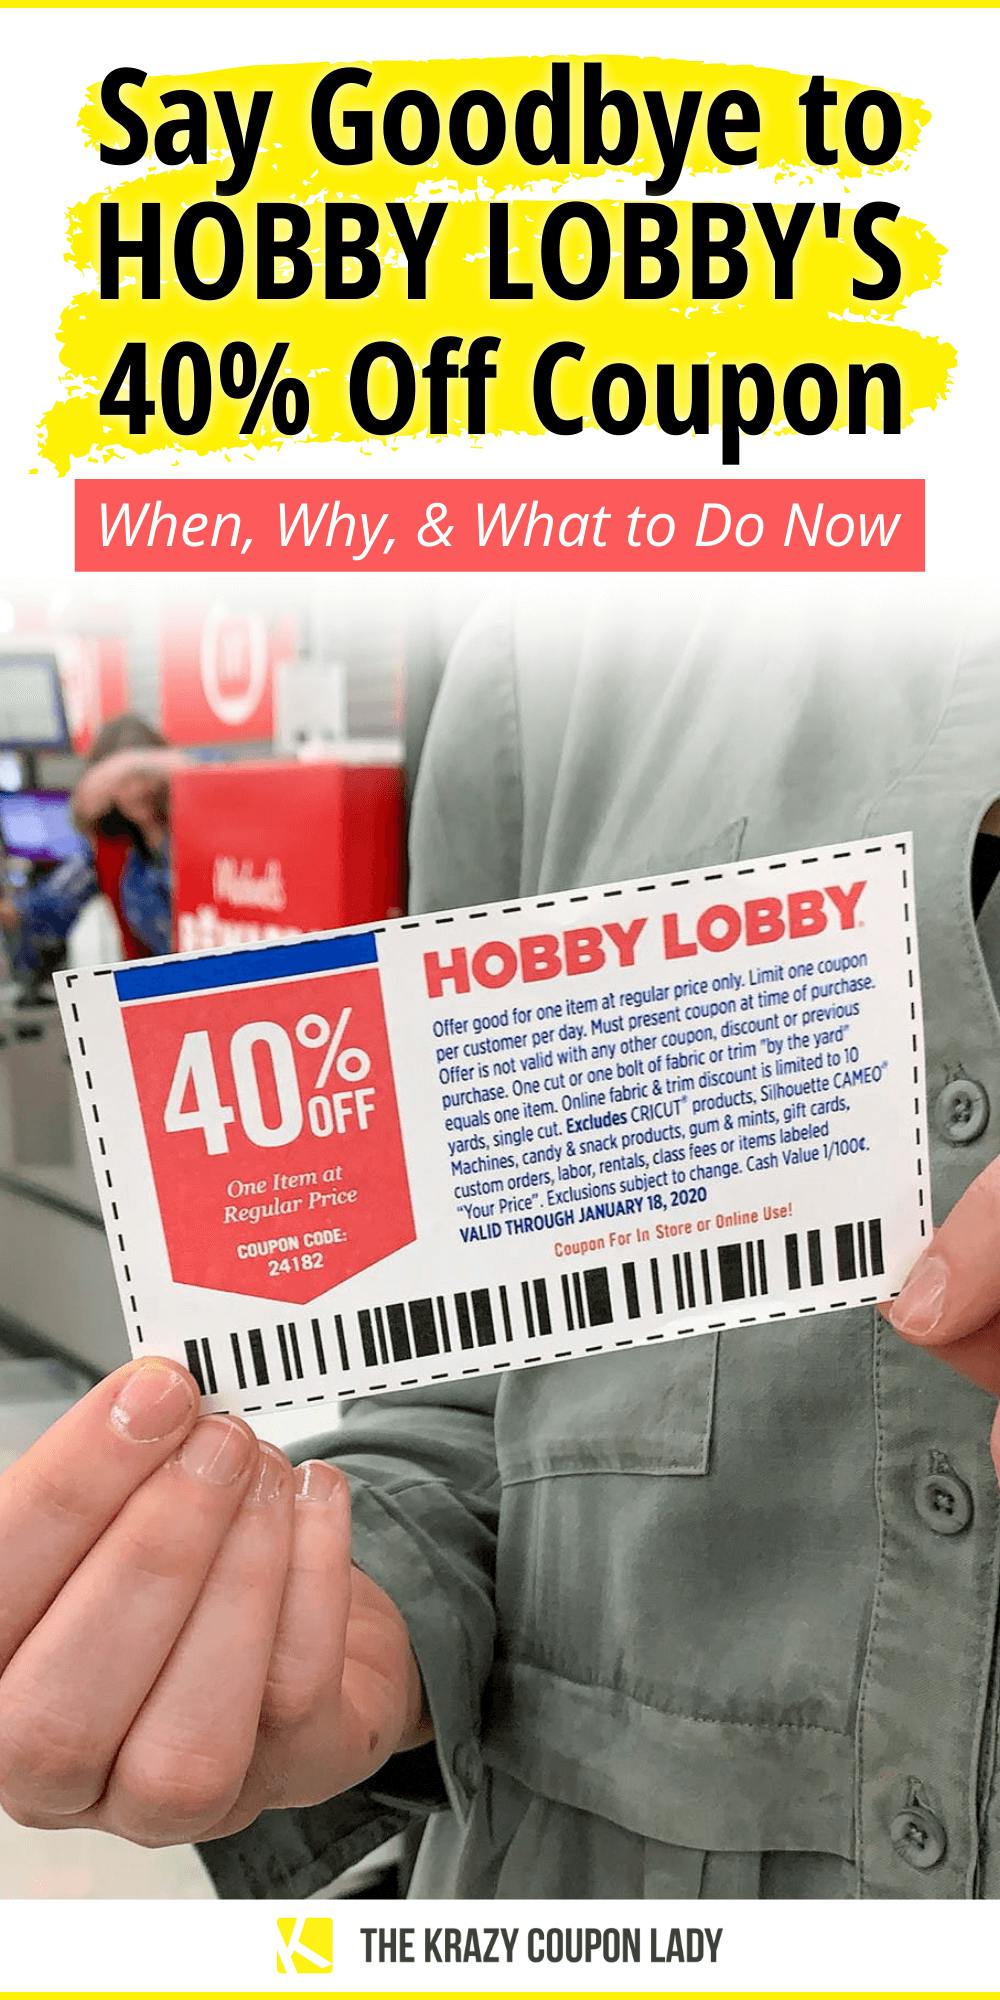 Say Goodbye to Hobby Lobby's 40% Off Coupon - The Krazy Coupon Lady